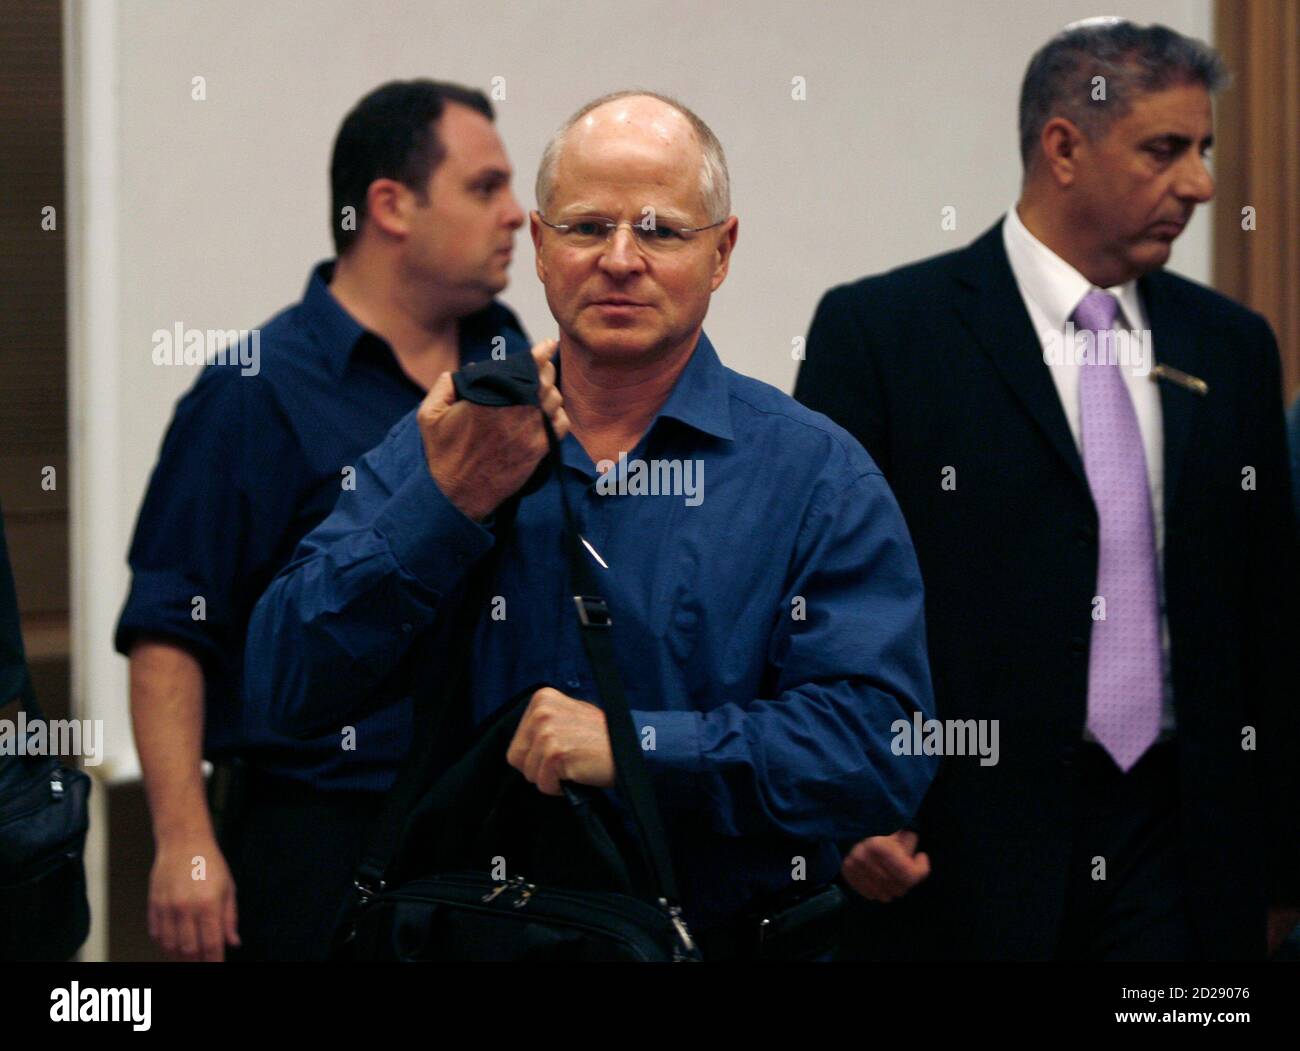 Noam Shalit (C), father of captured Israeli soldier Gilad Shalit, is seen  after his meeting with Israeli cabinet minister Yuli-Yoel Edelstein at the  Knesset, the Israeli parliament, in Jerusalem November 23, 2009.